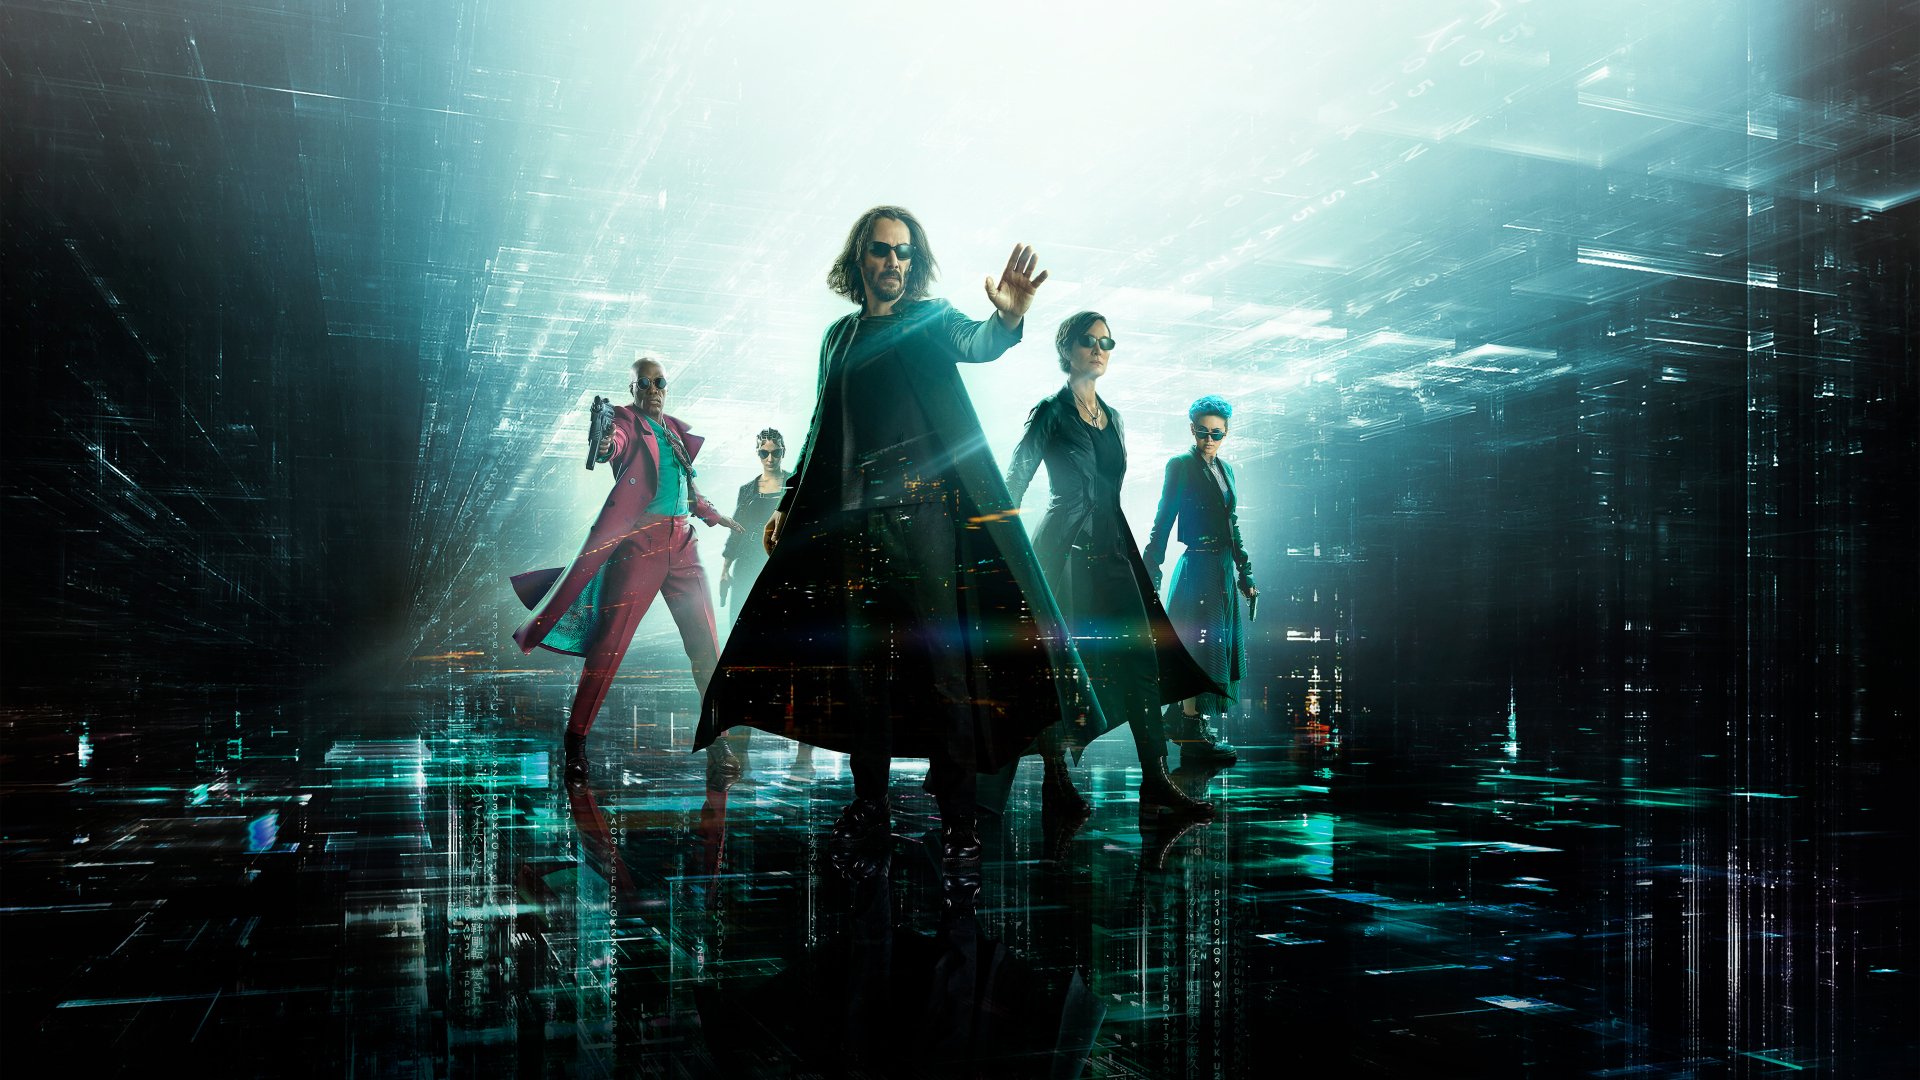 Neo, Trinity, and Morpheus from The Matrix Resurrections movie, portrayed by Keanu Reeves, Carrie-Anne Moss, and Yahya Abdul-Mateen II on a HD desktop wallpaper.